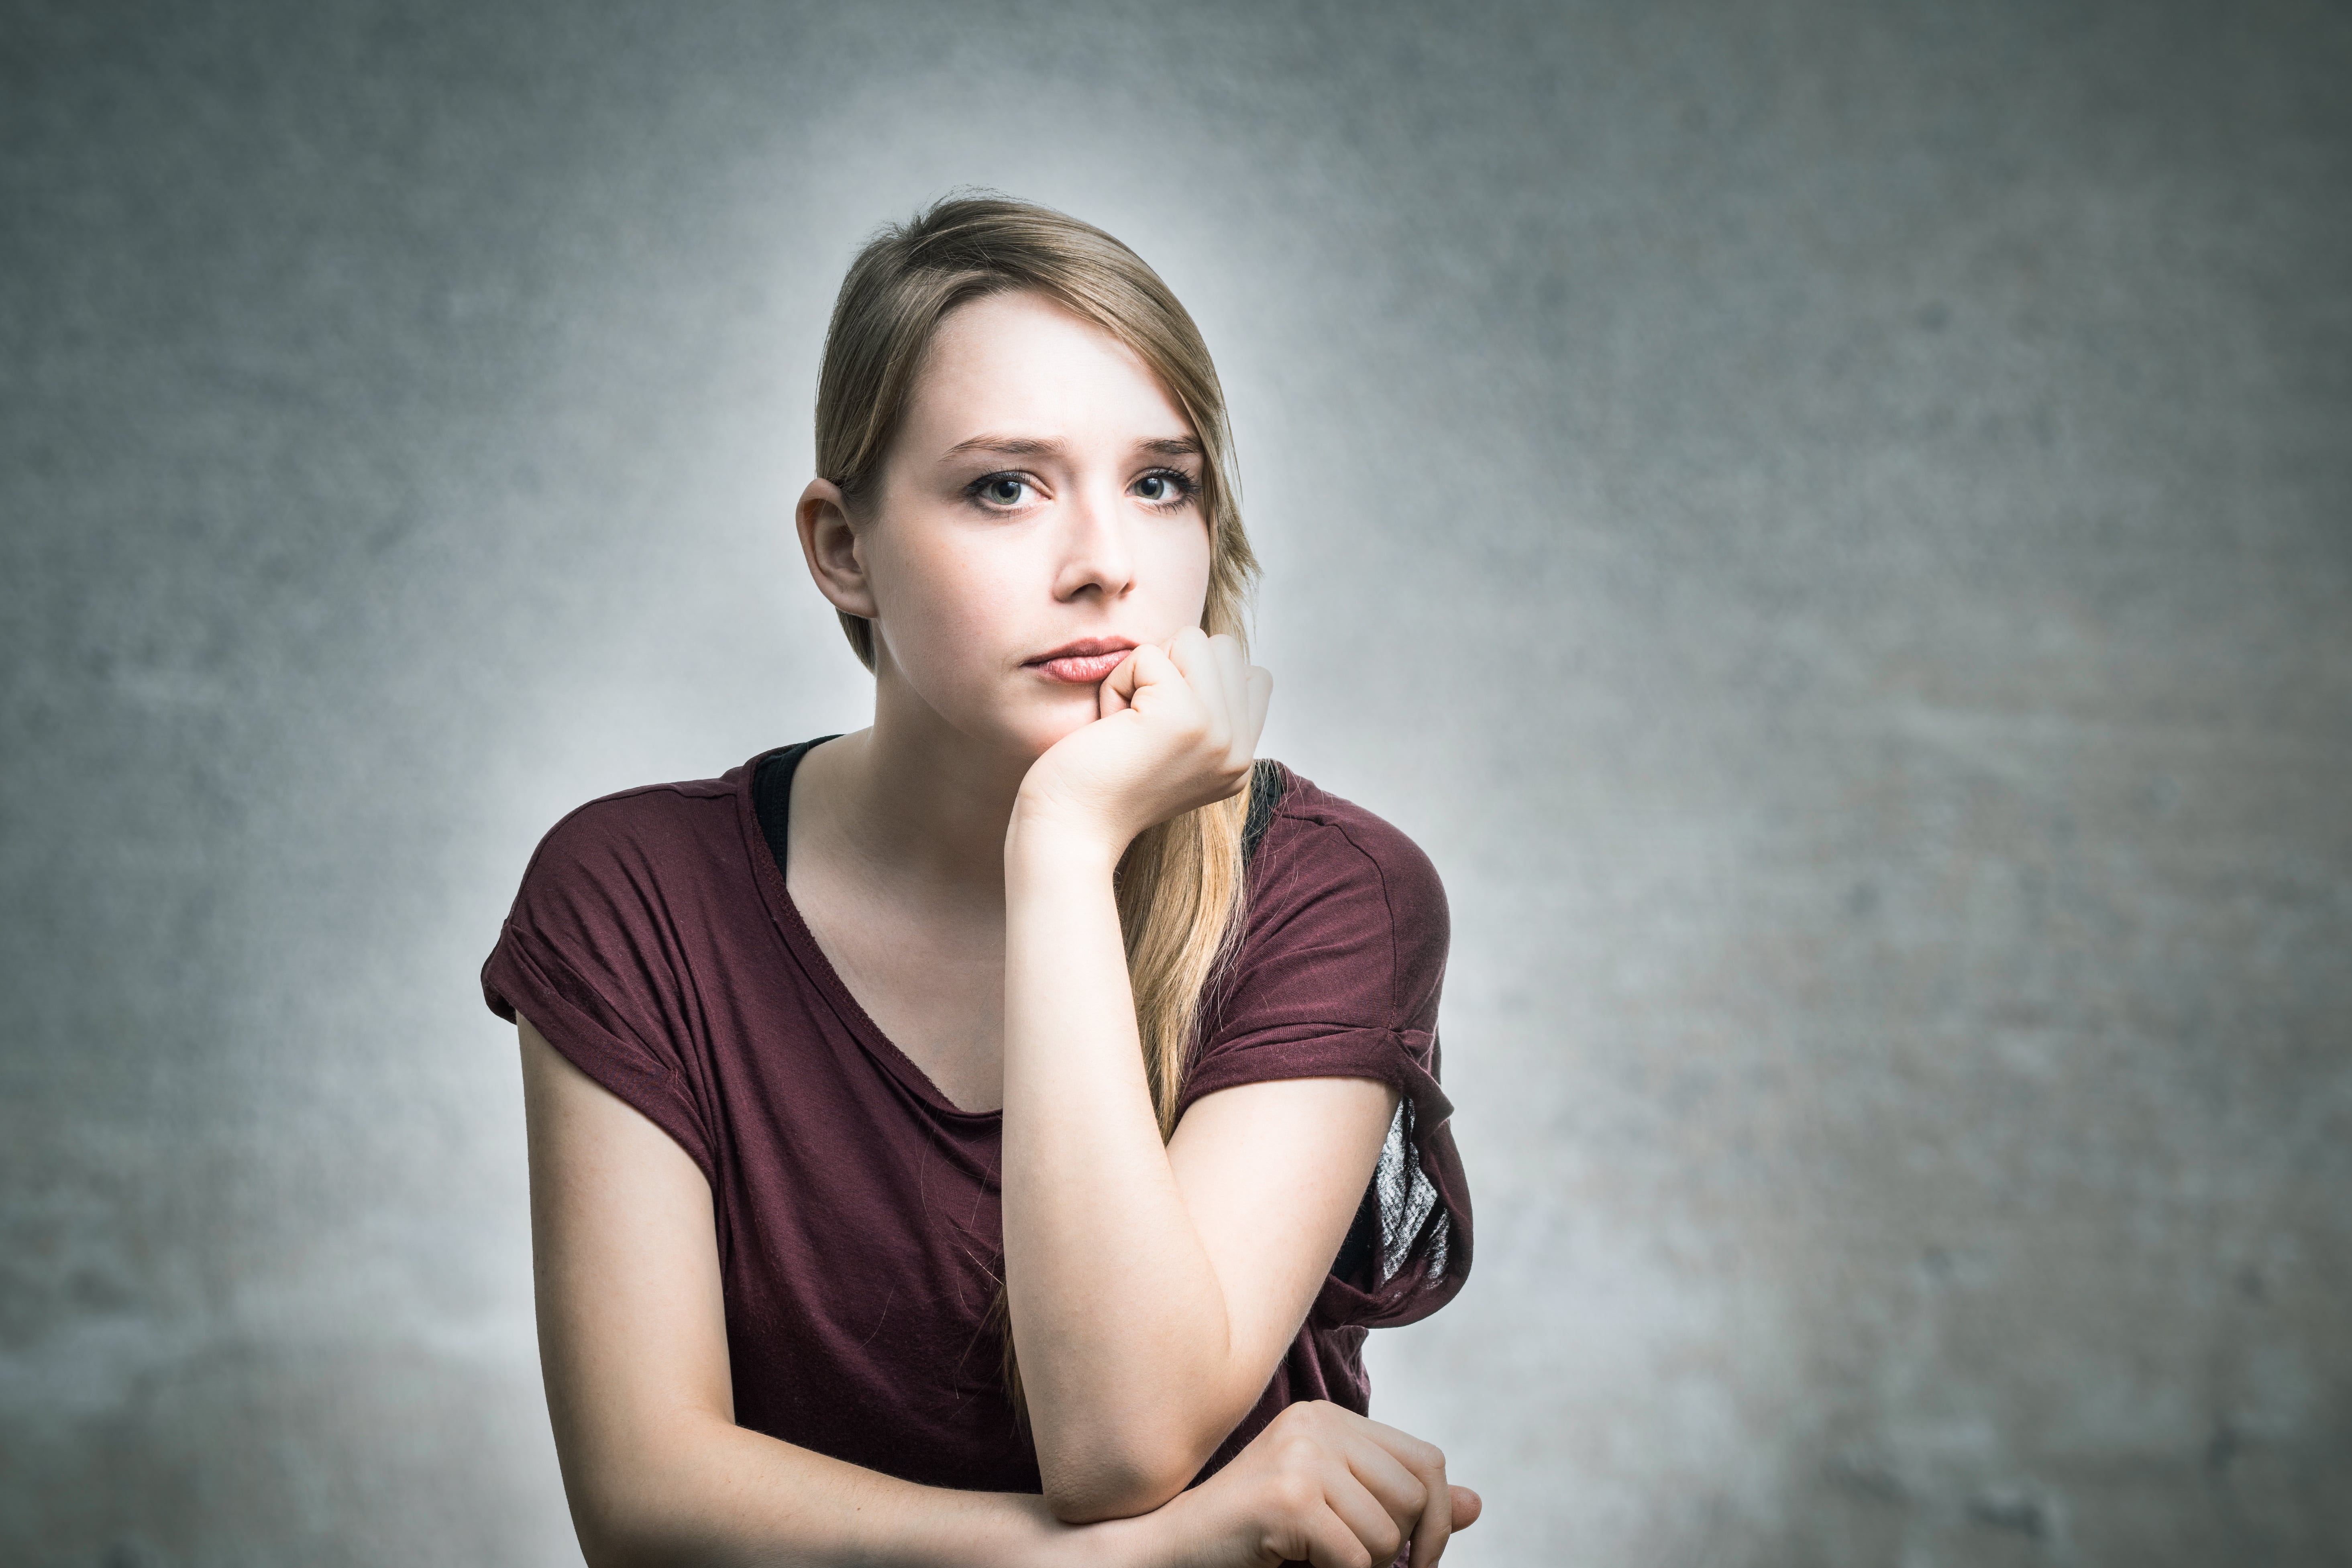 4 Dating Tips for the Introverted Woman